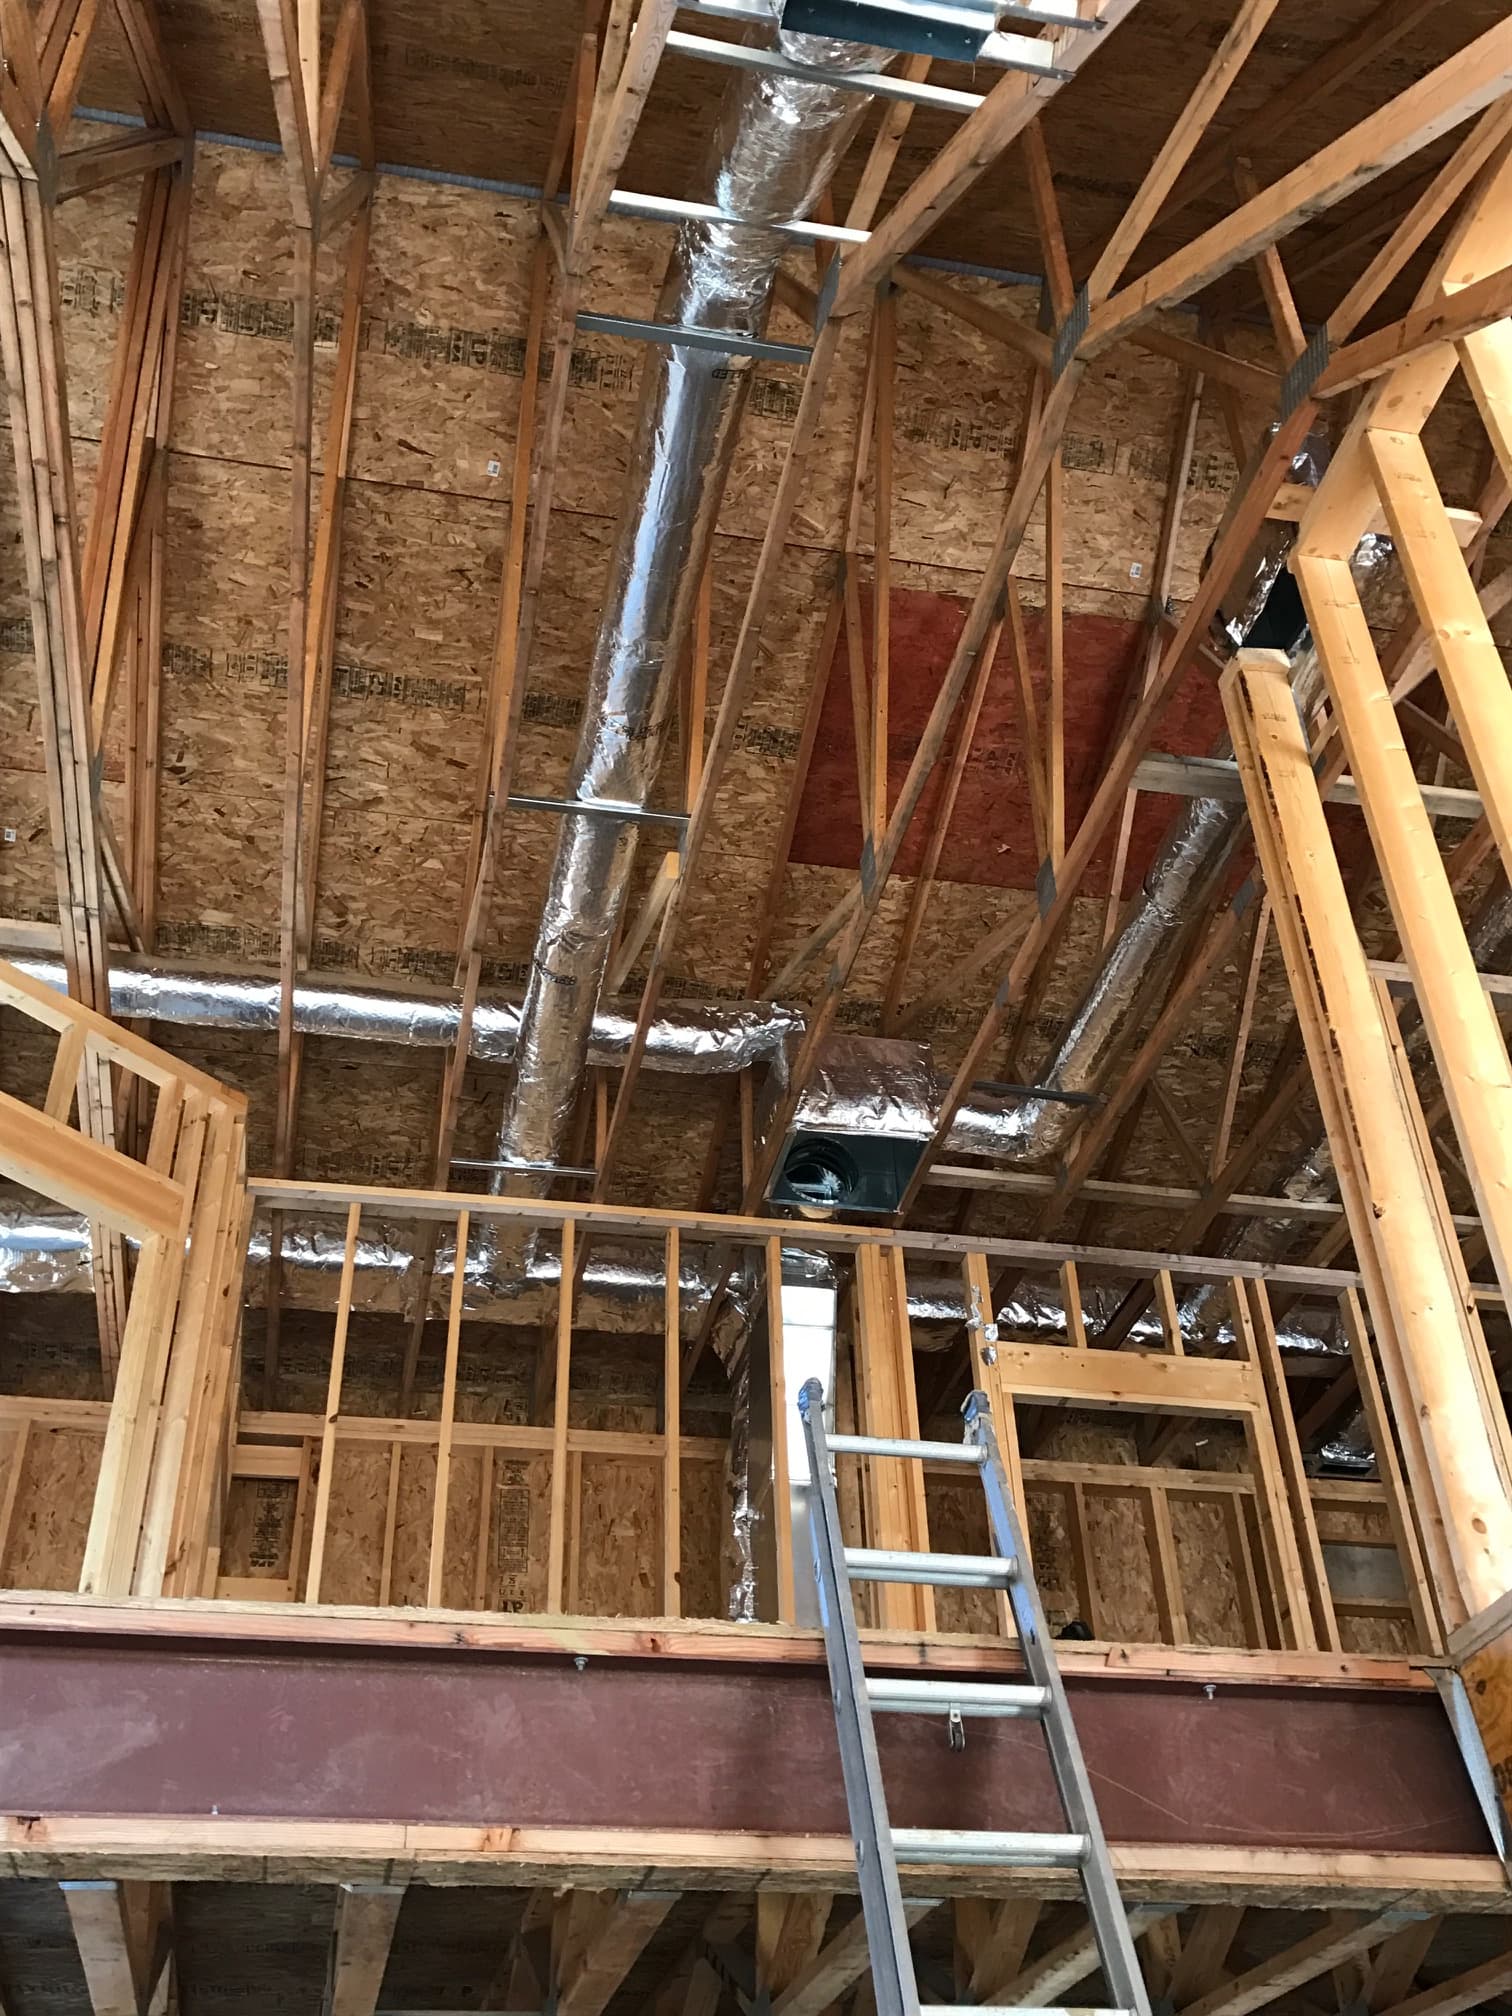 HVAC in the roof